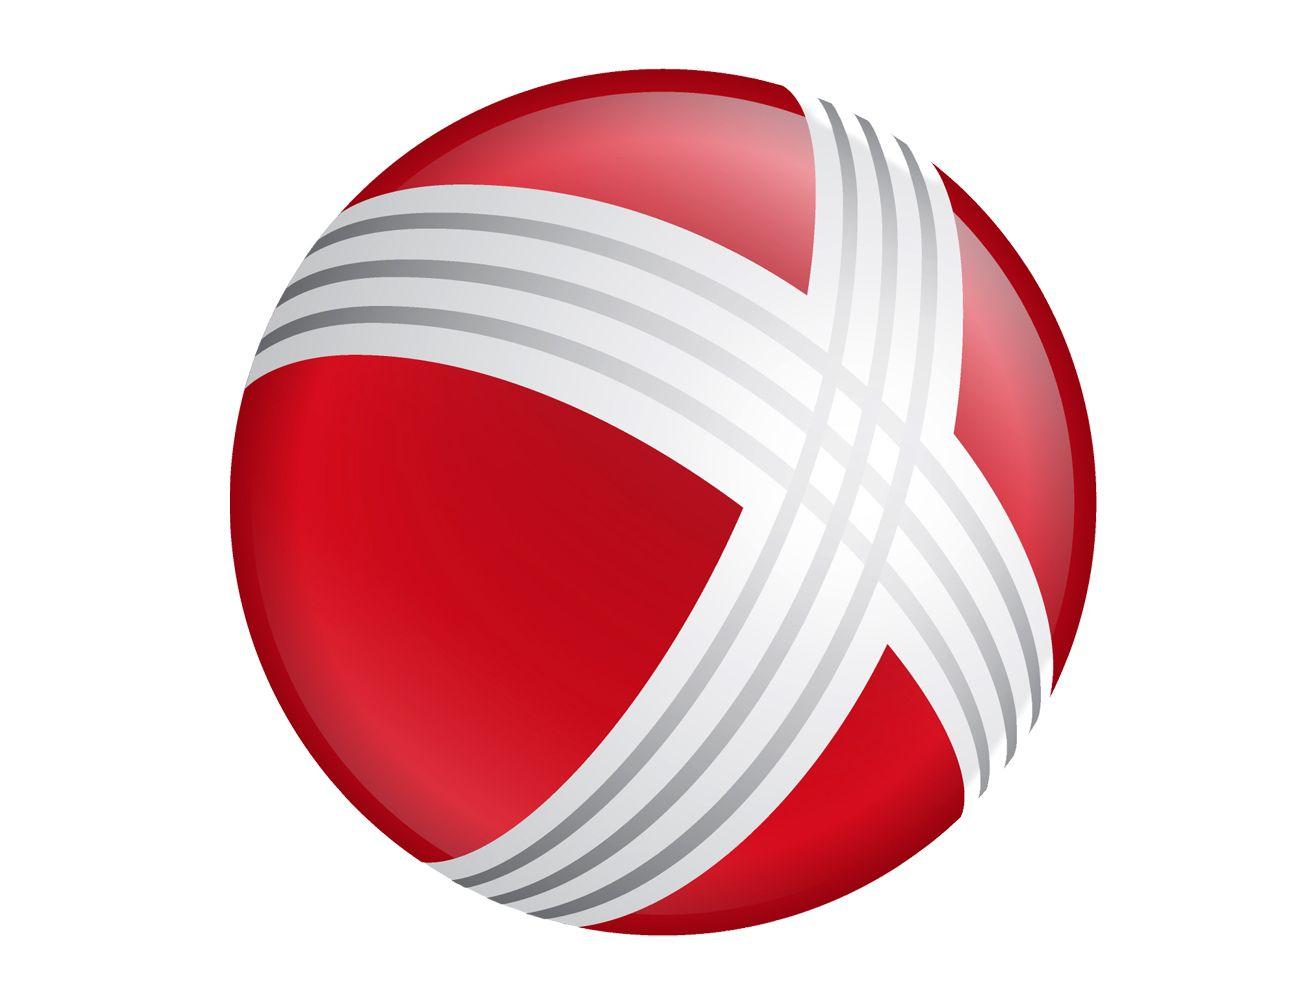 Red Ball with X Logo - Xerox Logo, Xerox Symbol, Meaning, History and Evolution